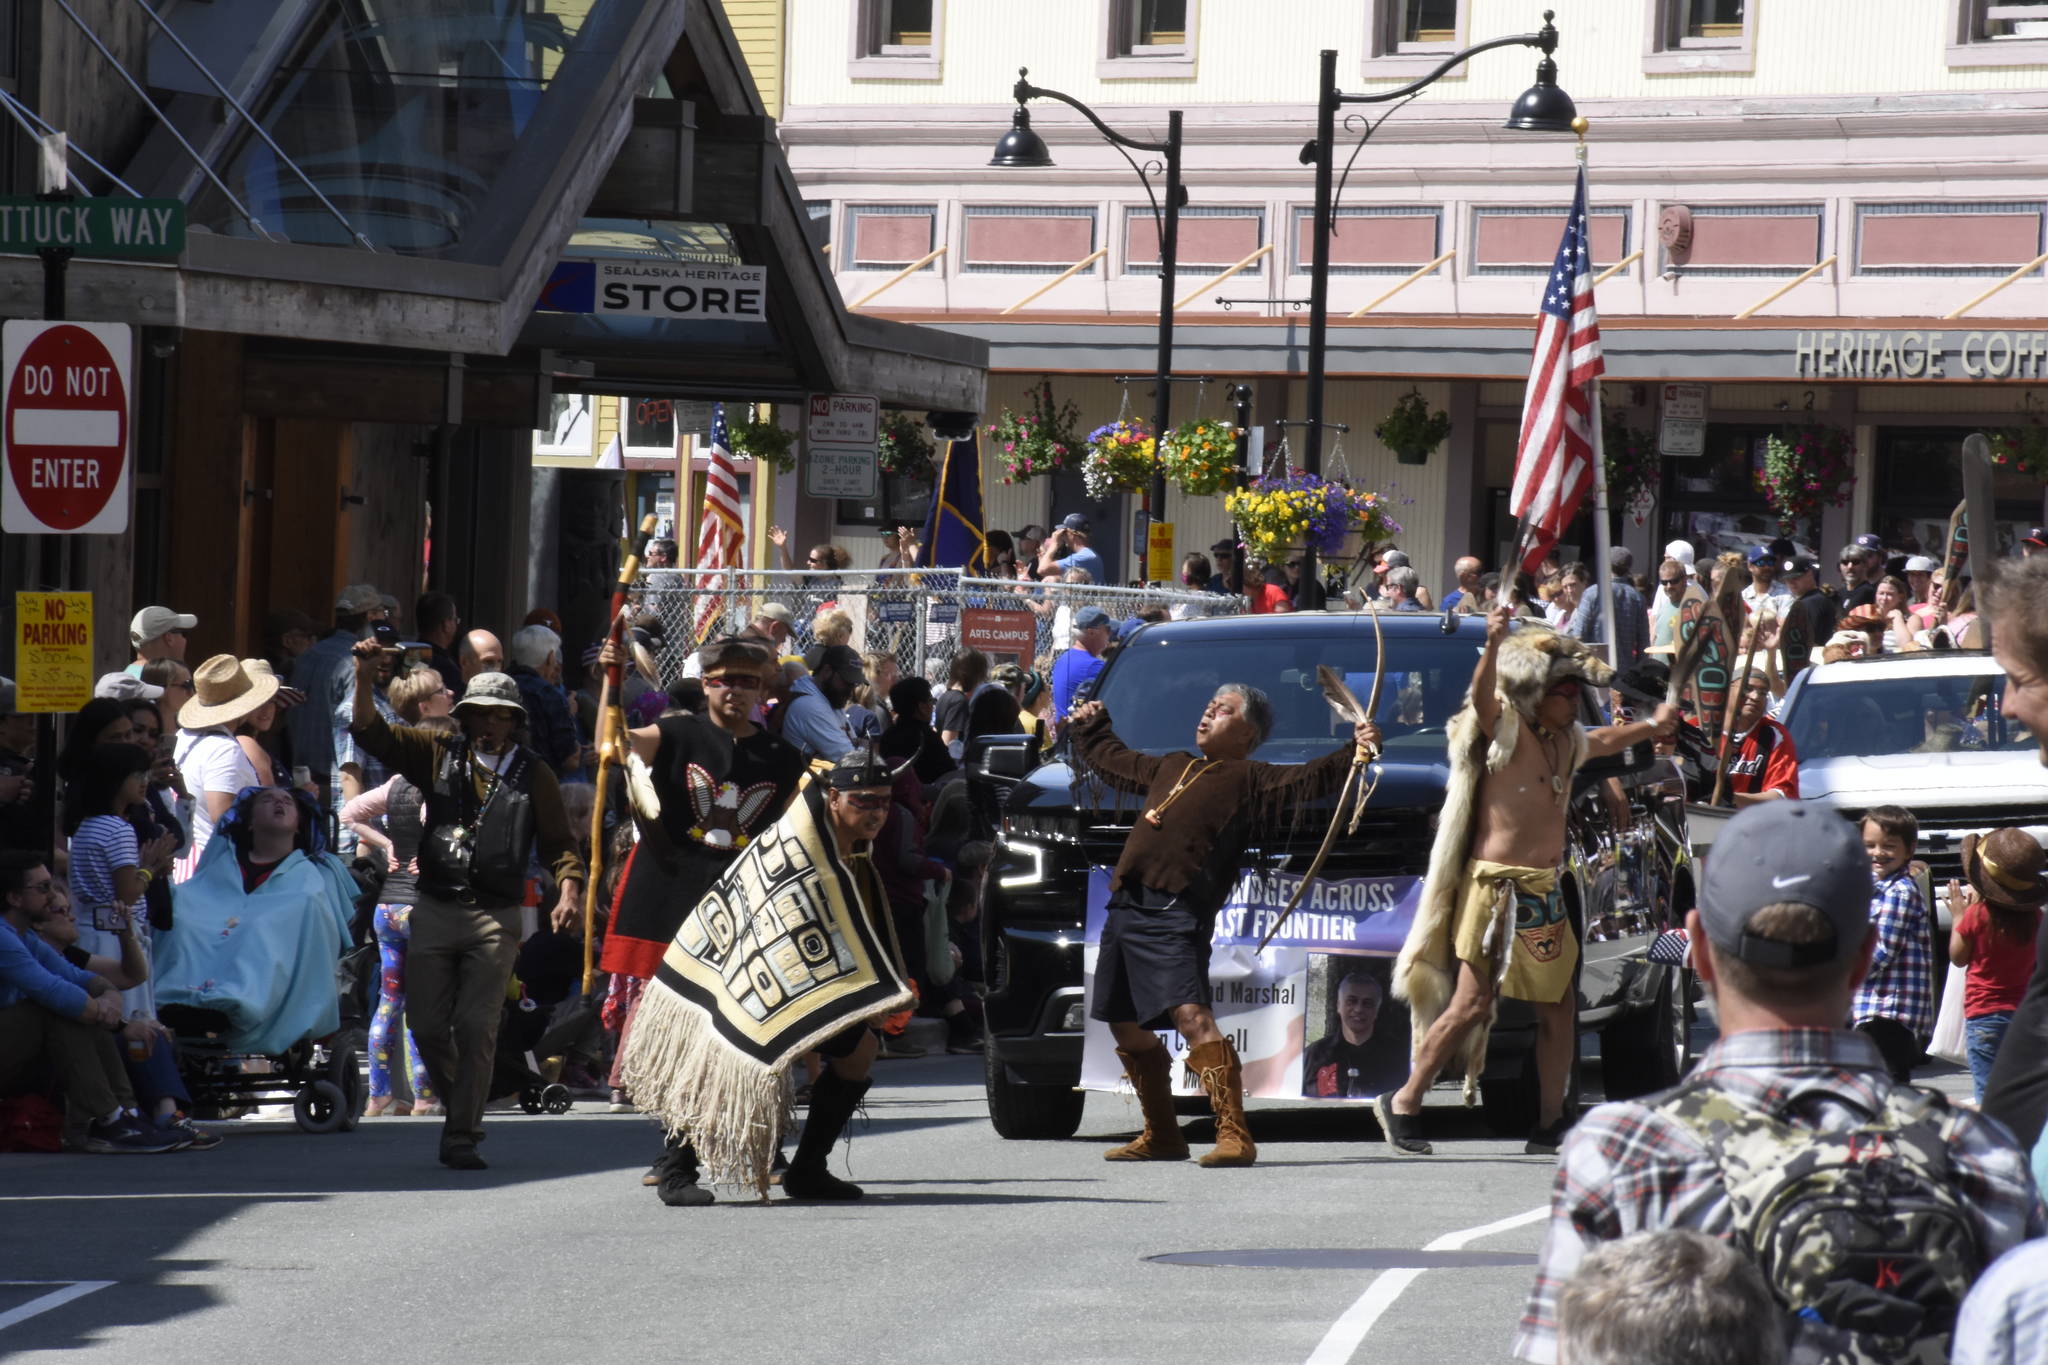 The Juneau Fourth of July parade makes its way through downtown Juneau. (Peter Segall / Juneau Empire)